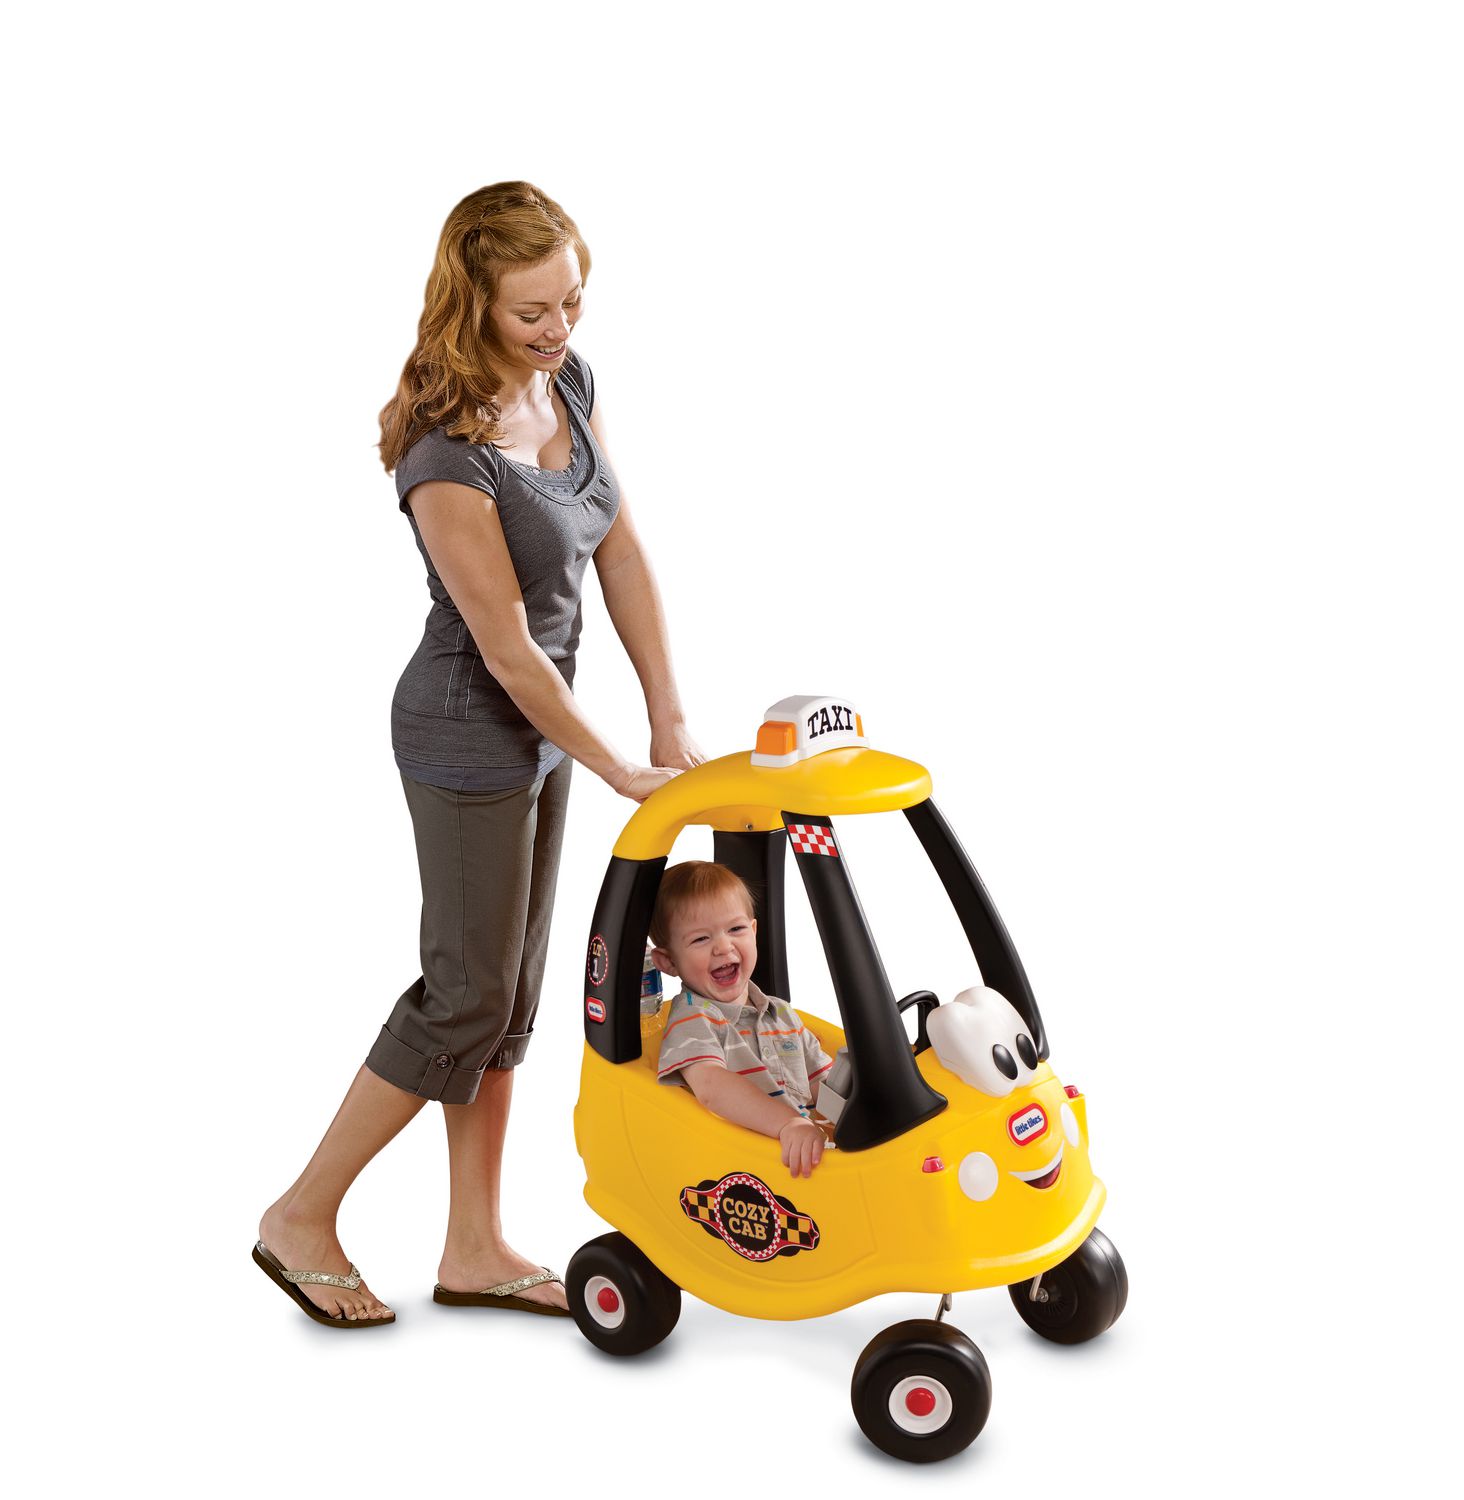 Little Tikes Black Taxi Cozy Coupe Ride-on